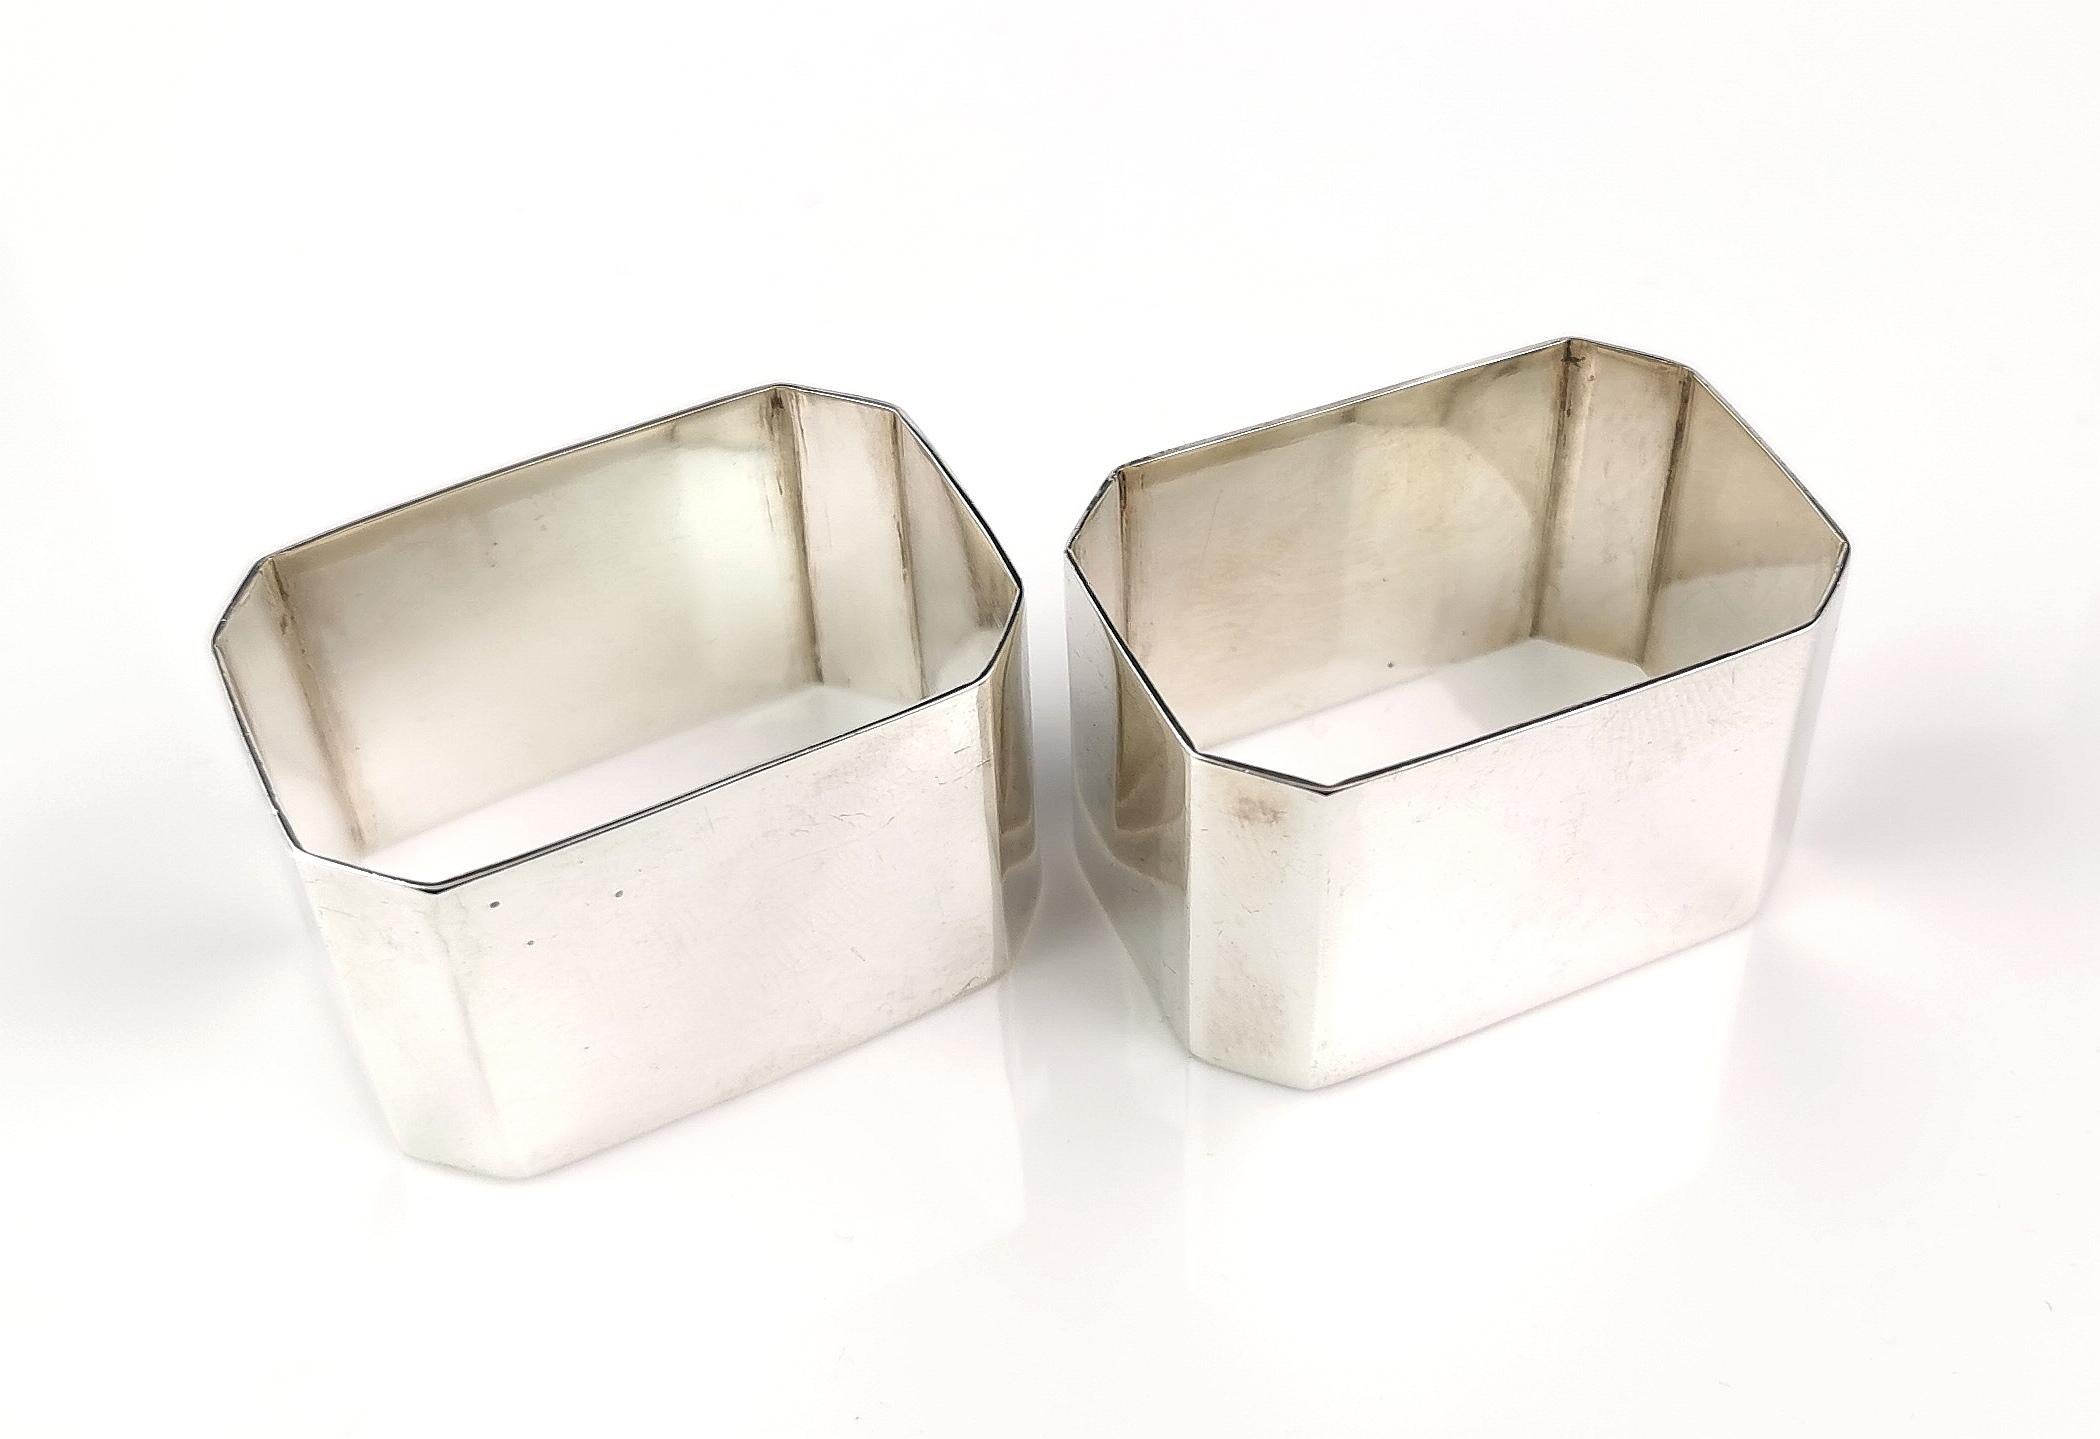 British Vintage Art Deco sterling silver napkin rings, Pair, Geometric  For Sale